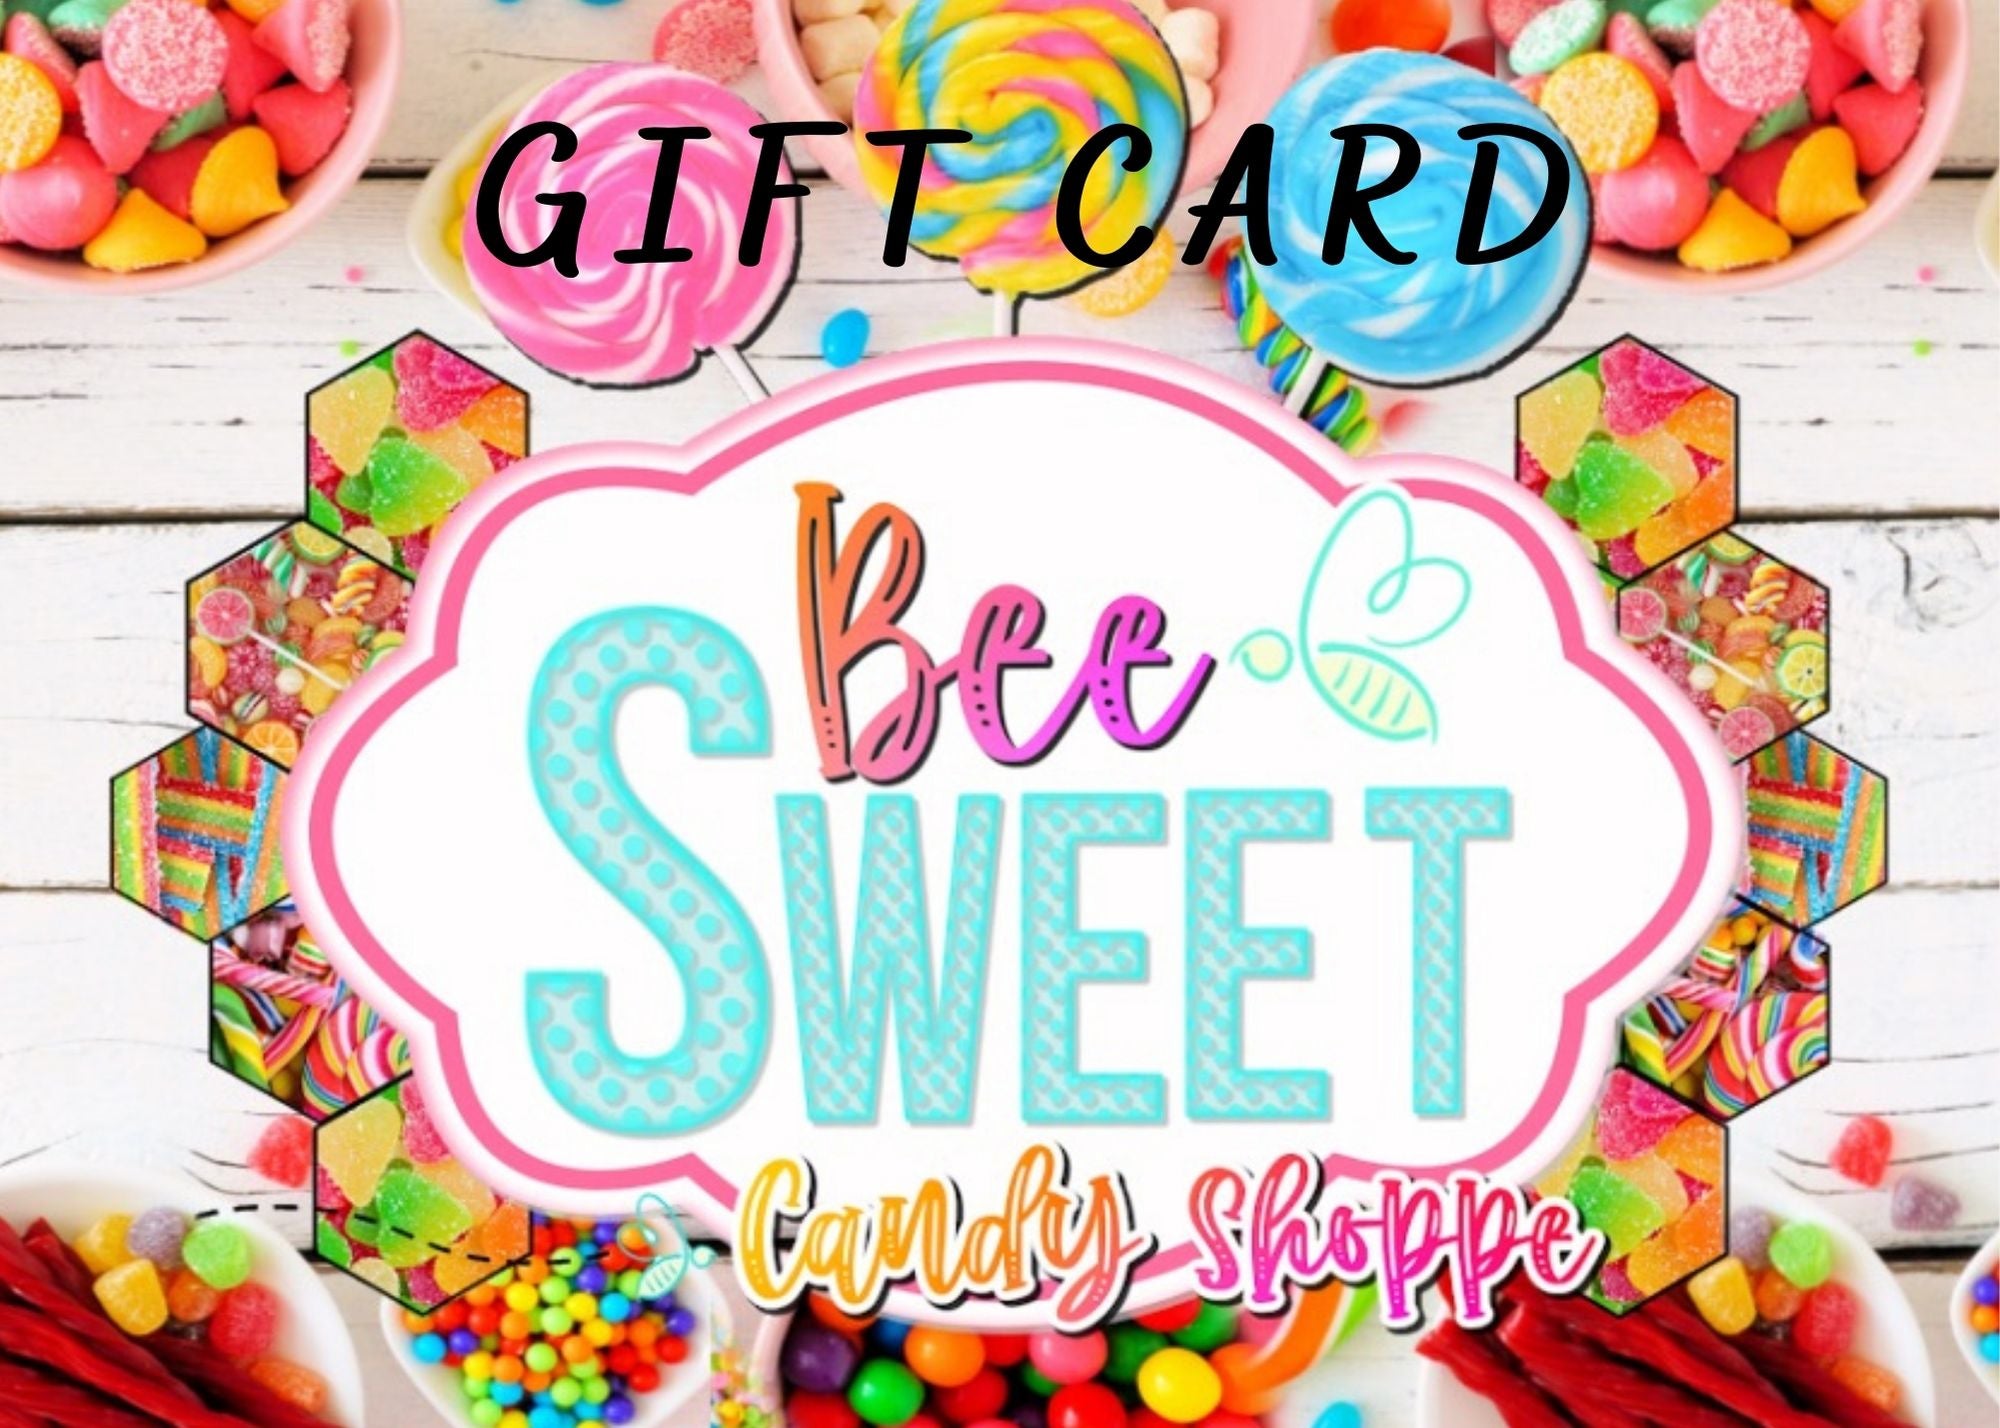 Bee Sweet Candy Shoppe Gift Card